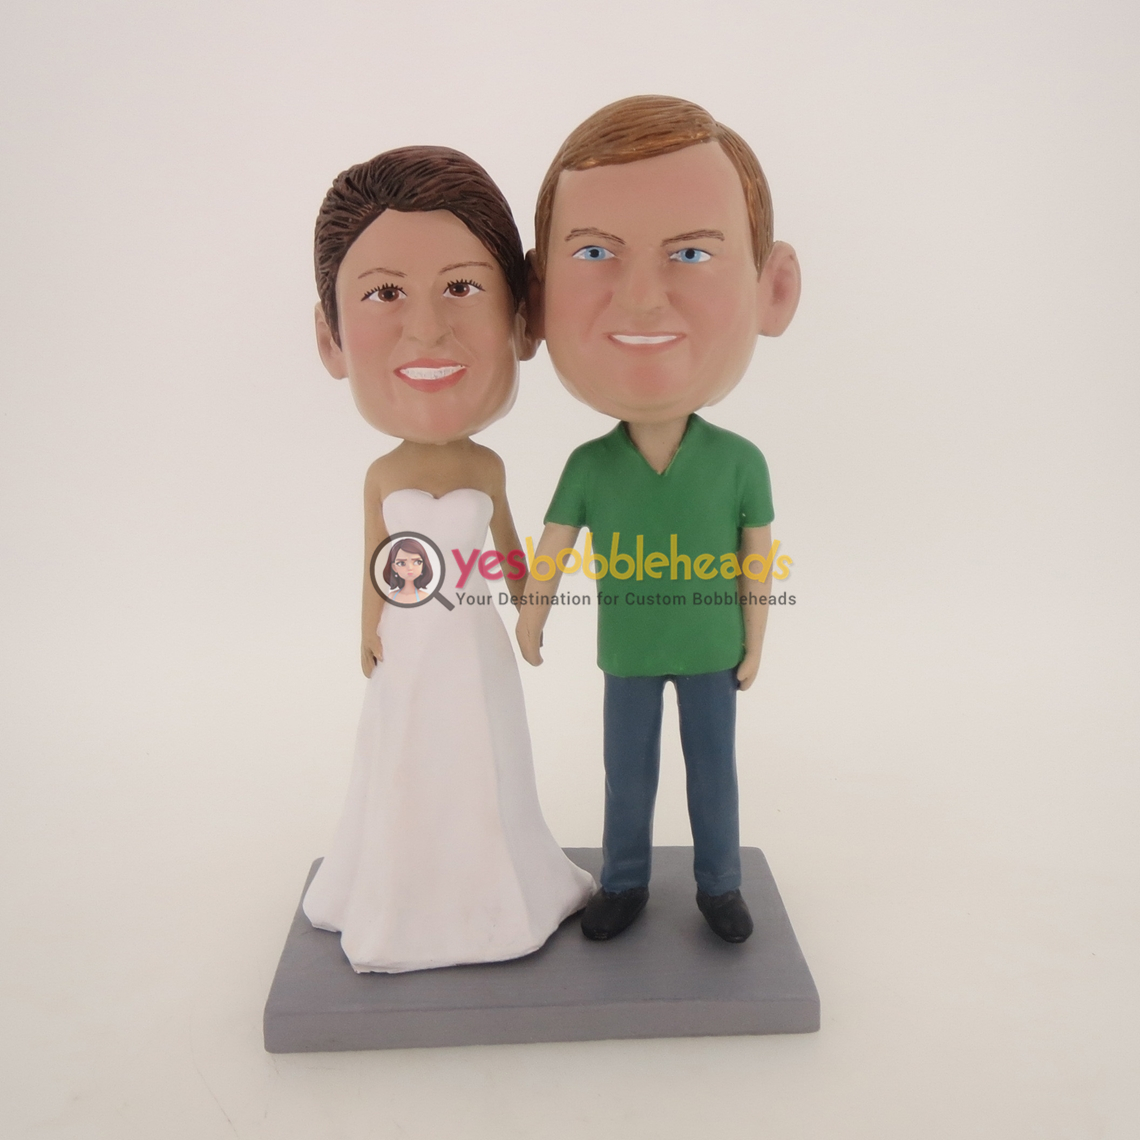 Picture of Custom Bobblehead Doll: Hand In Hand White Dress Bride Couple